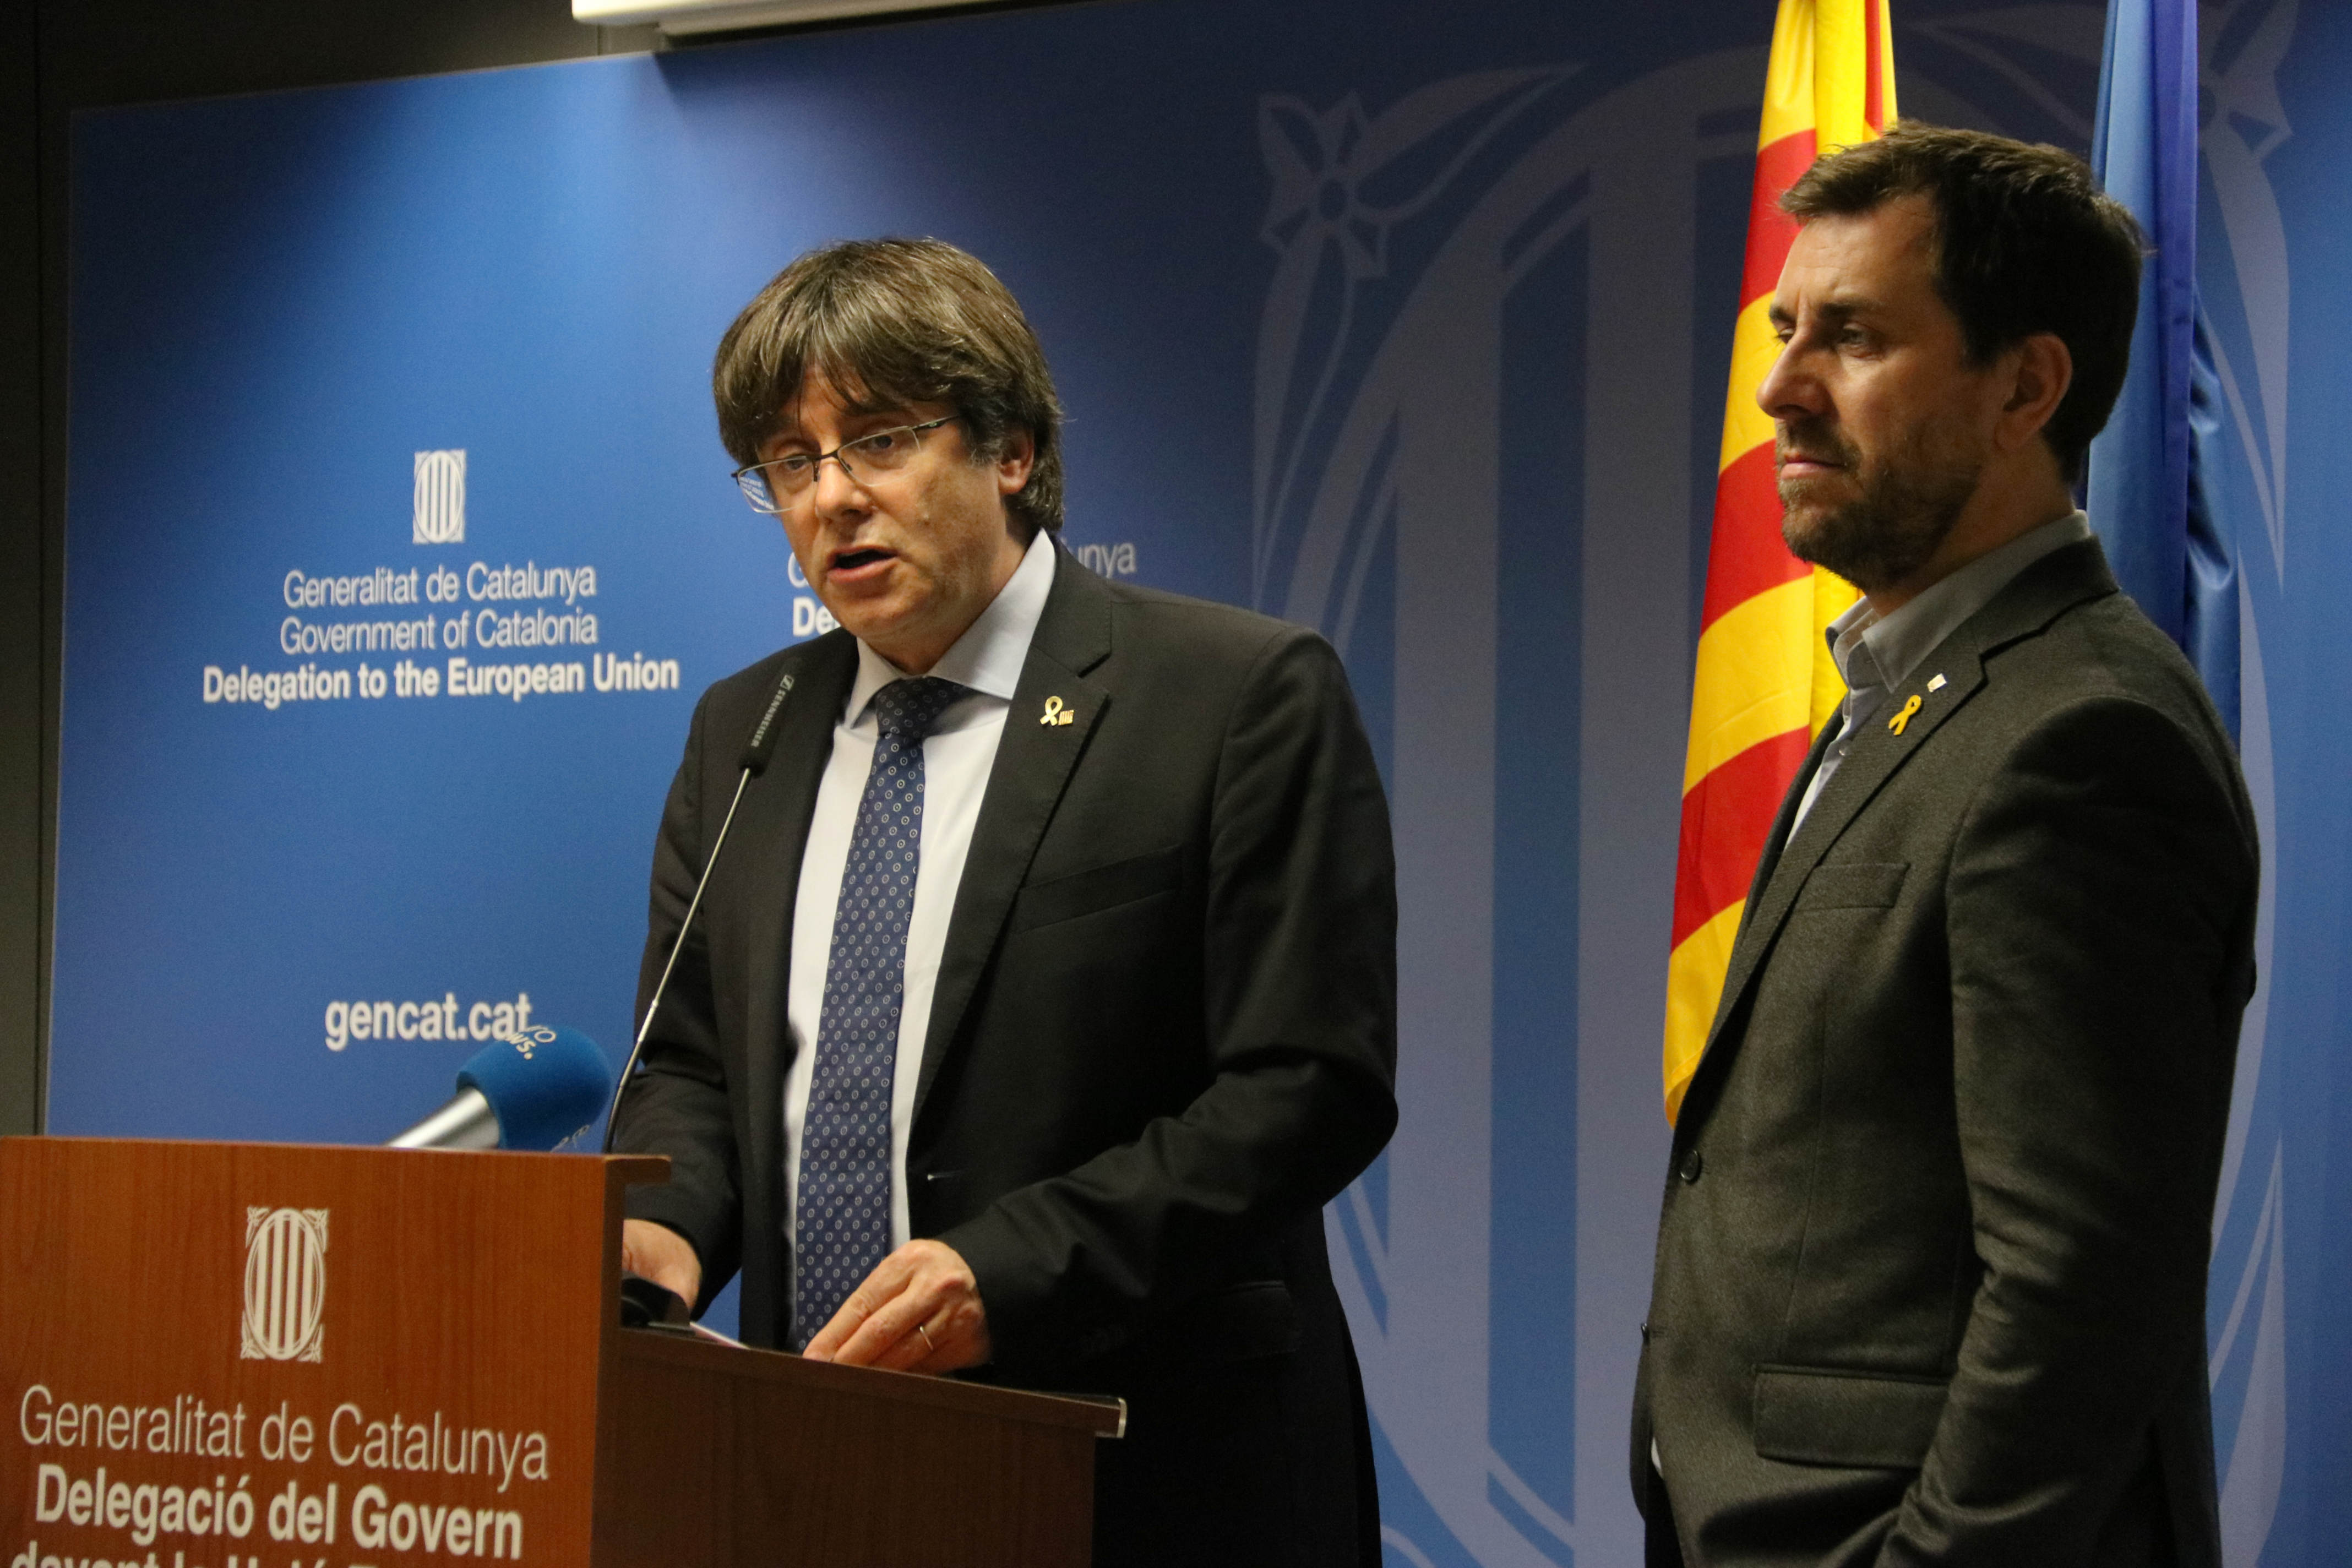 European Court says Puigdemont and Comín's MEP appeal needs to be reviewed